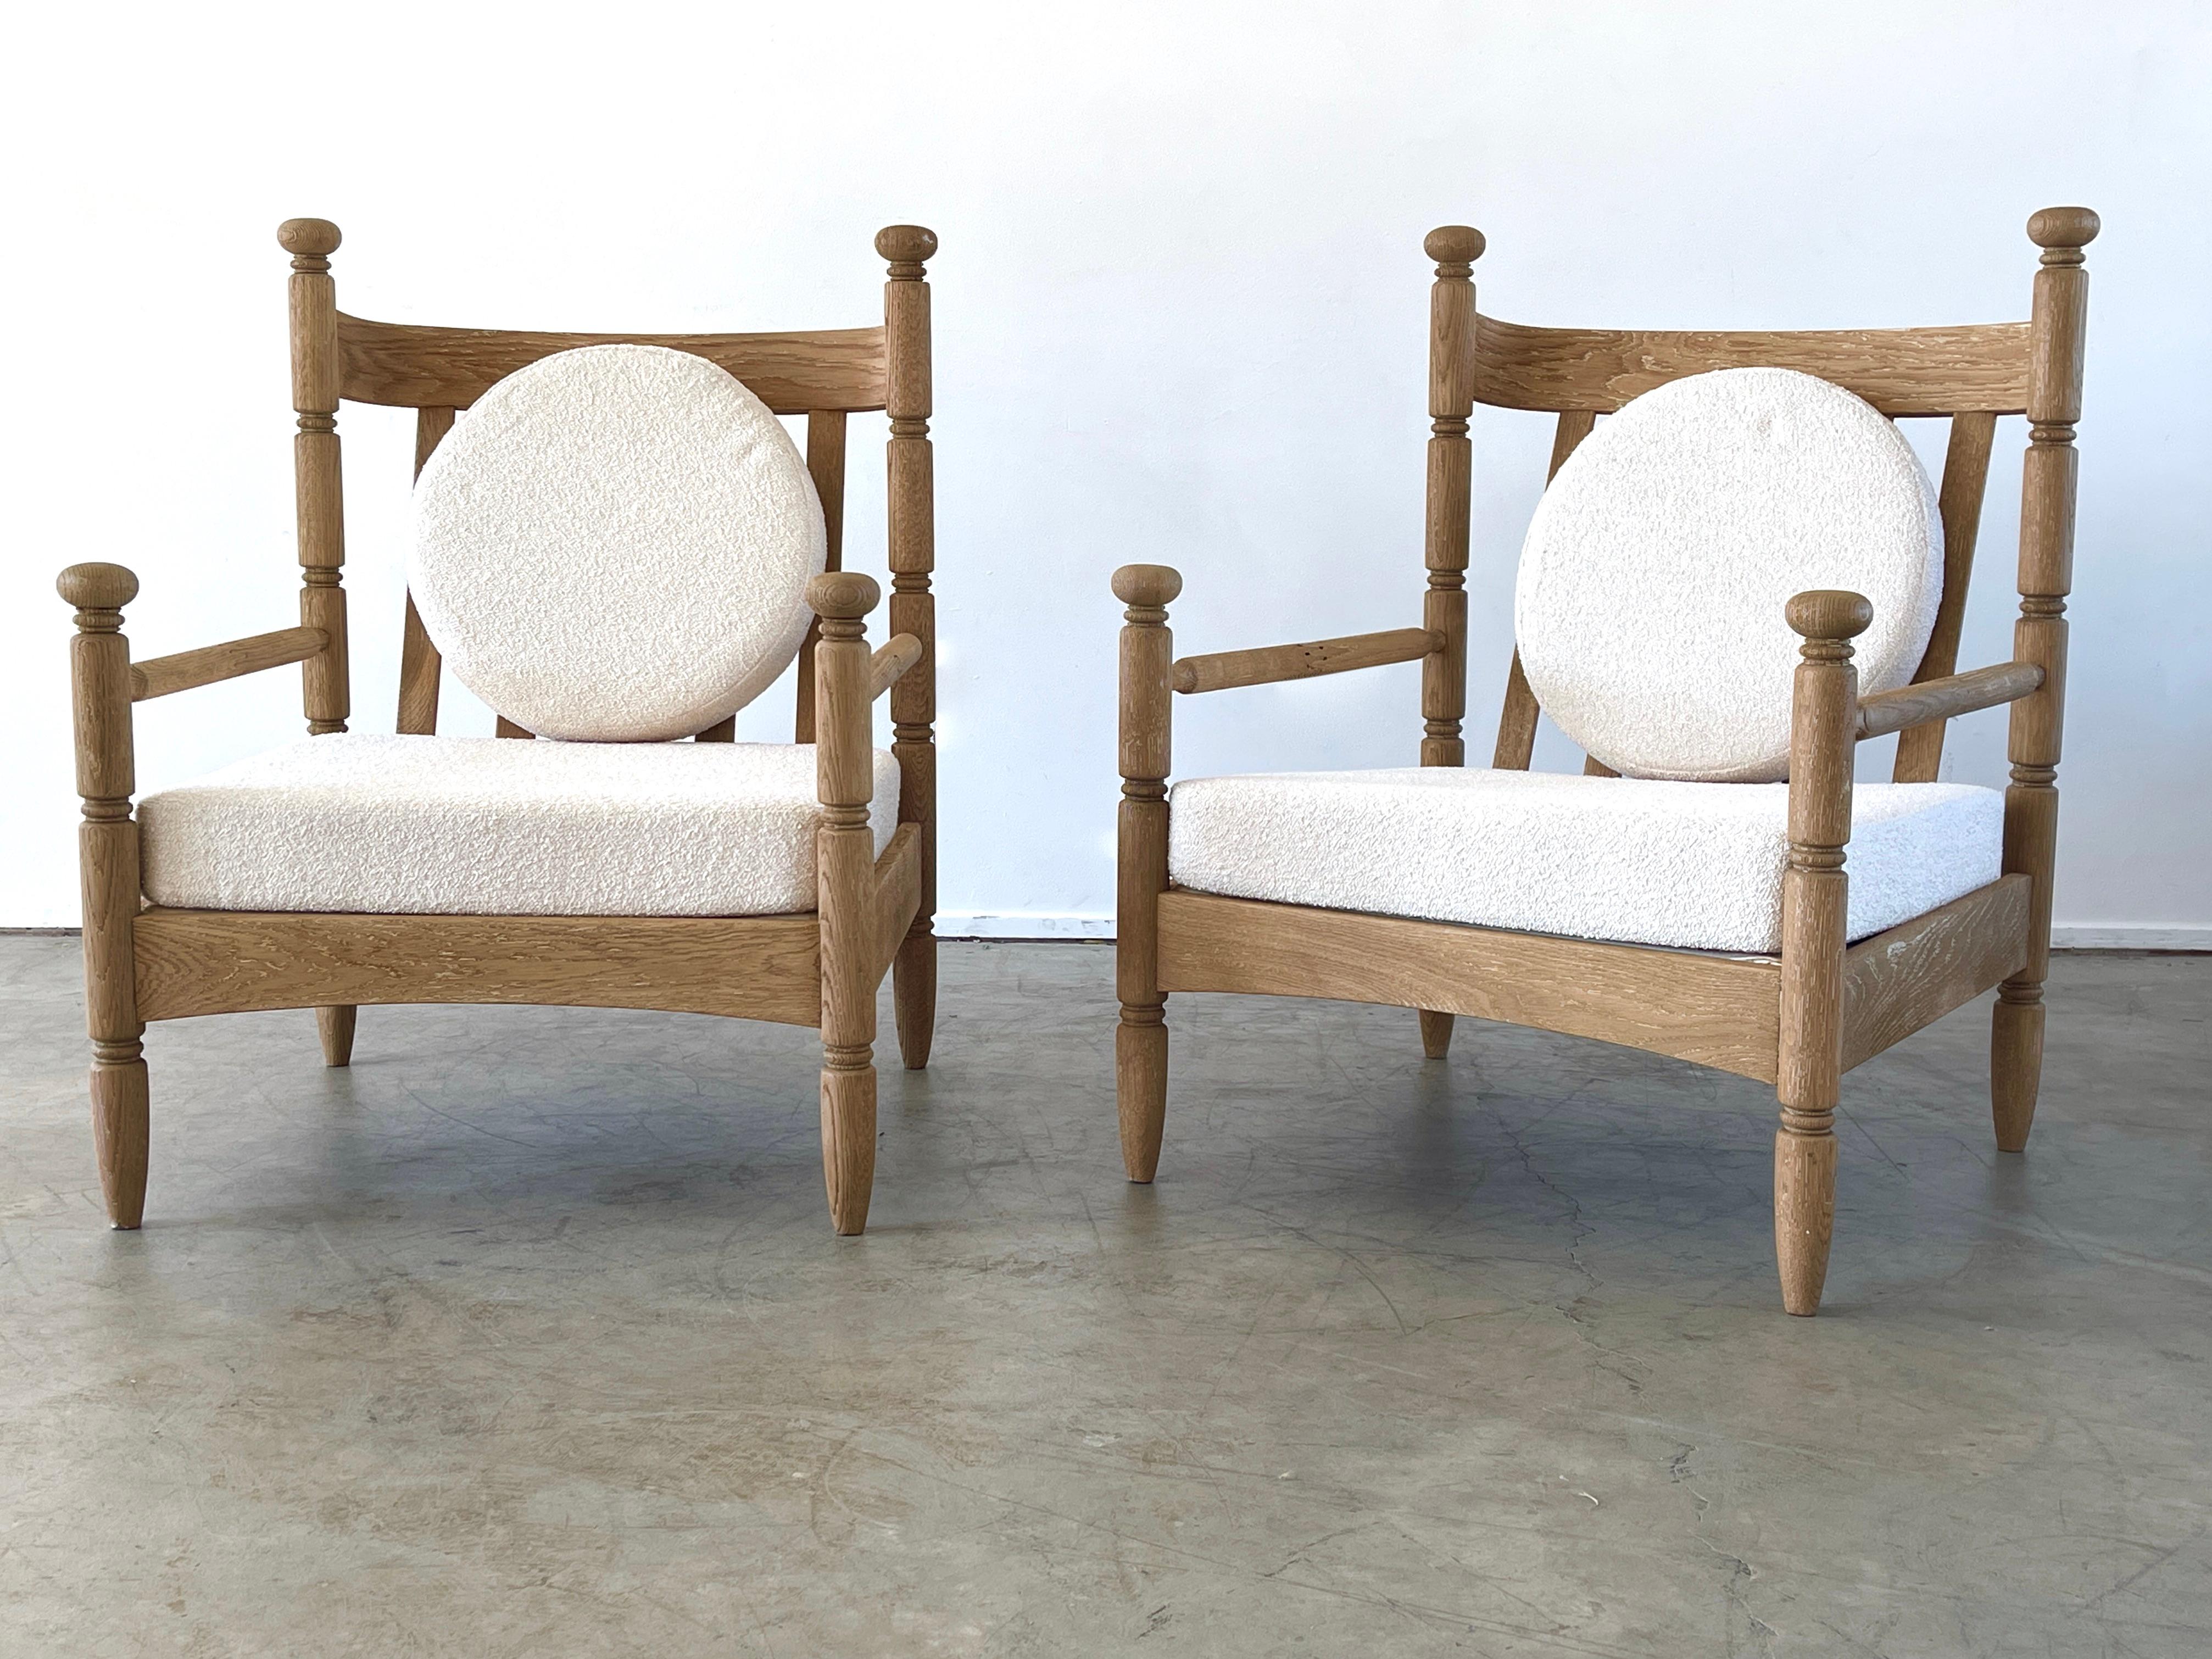 Pair of chairs in cerused oak with fantastic curved shaped back and carved legs. Newly upholstered in France in creamy boucle fabric with circular cushion